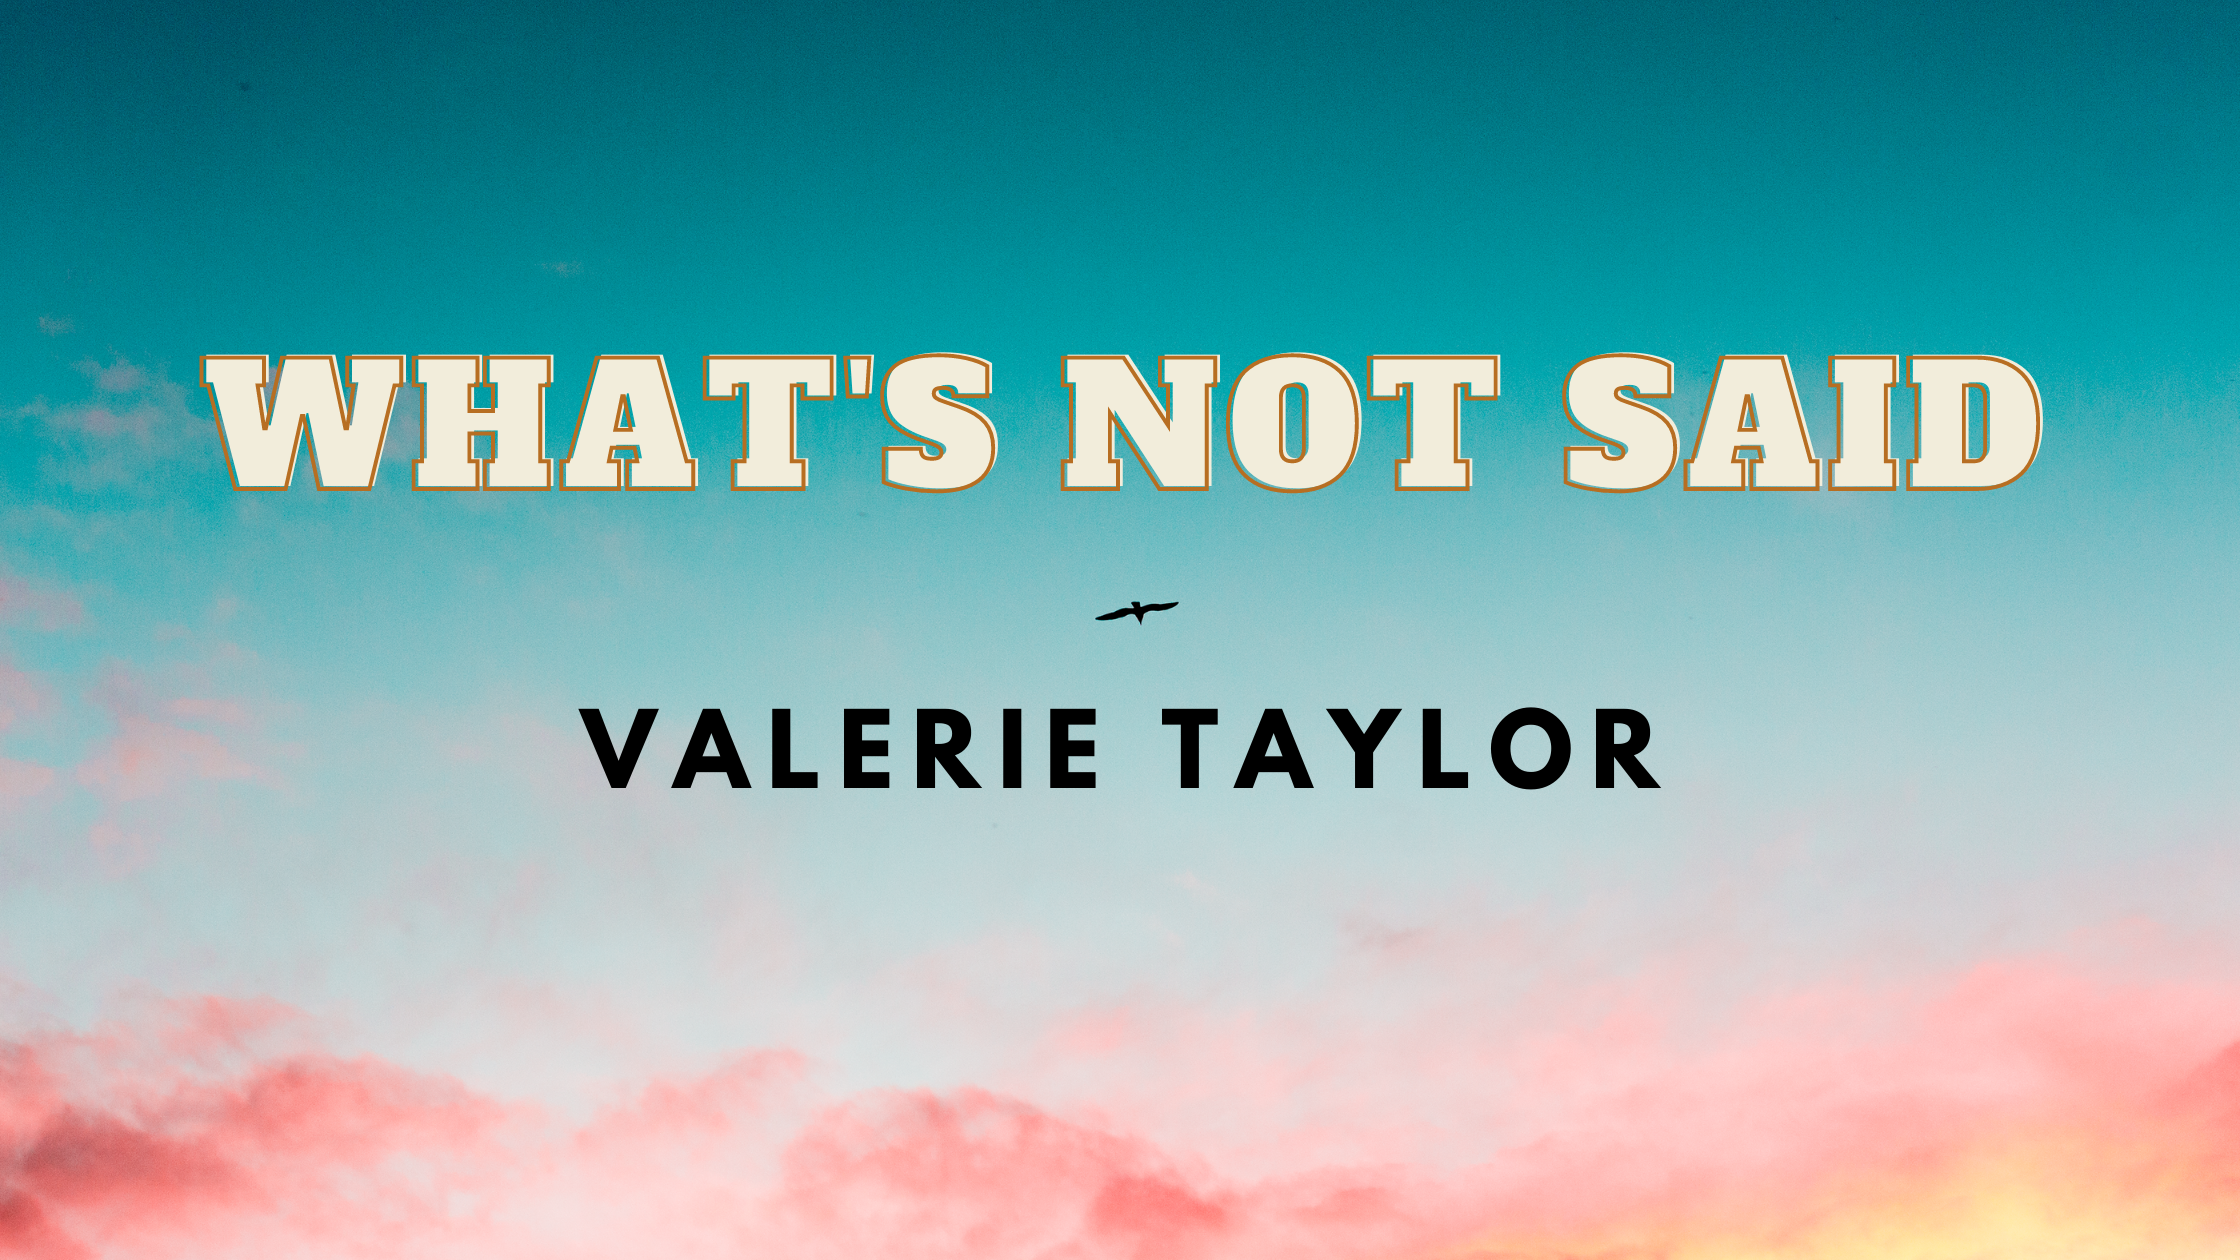 Book Review & Author Interview: Valerie Taylor of What’s Not Said